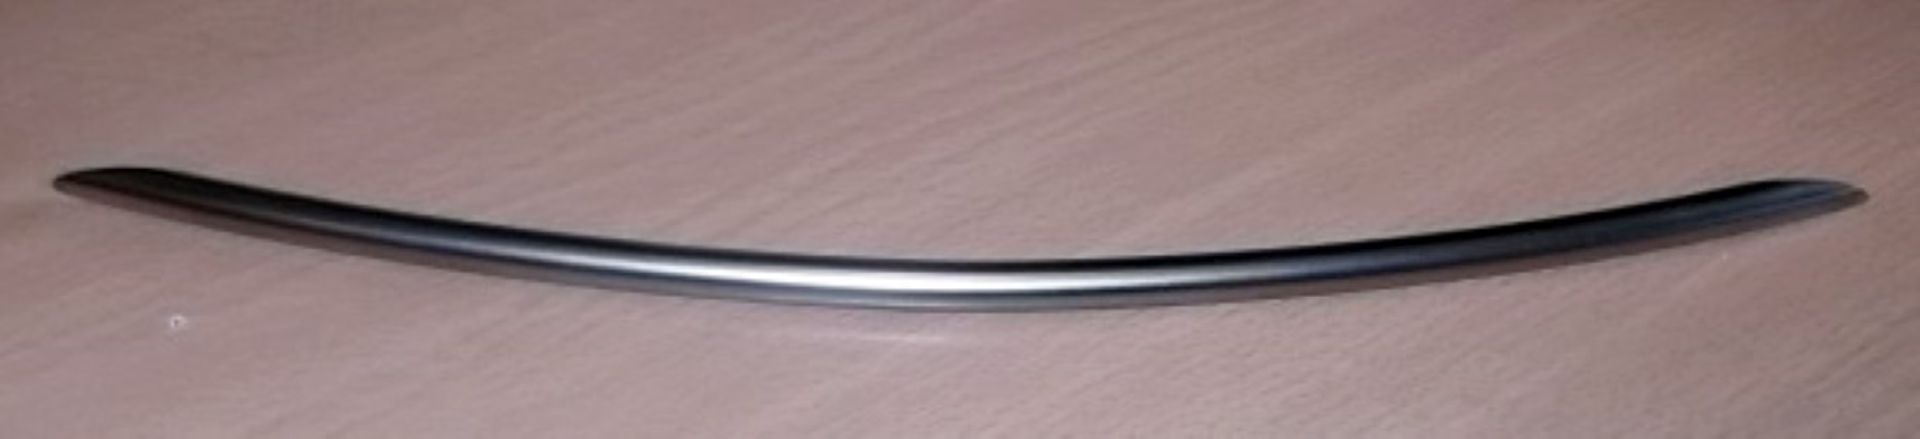 100 x BOW Handle Kitchen Door Handles By Crestwood - 320mm - New Stock - Brushed Nickel Finish - - Image 10 of 12